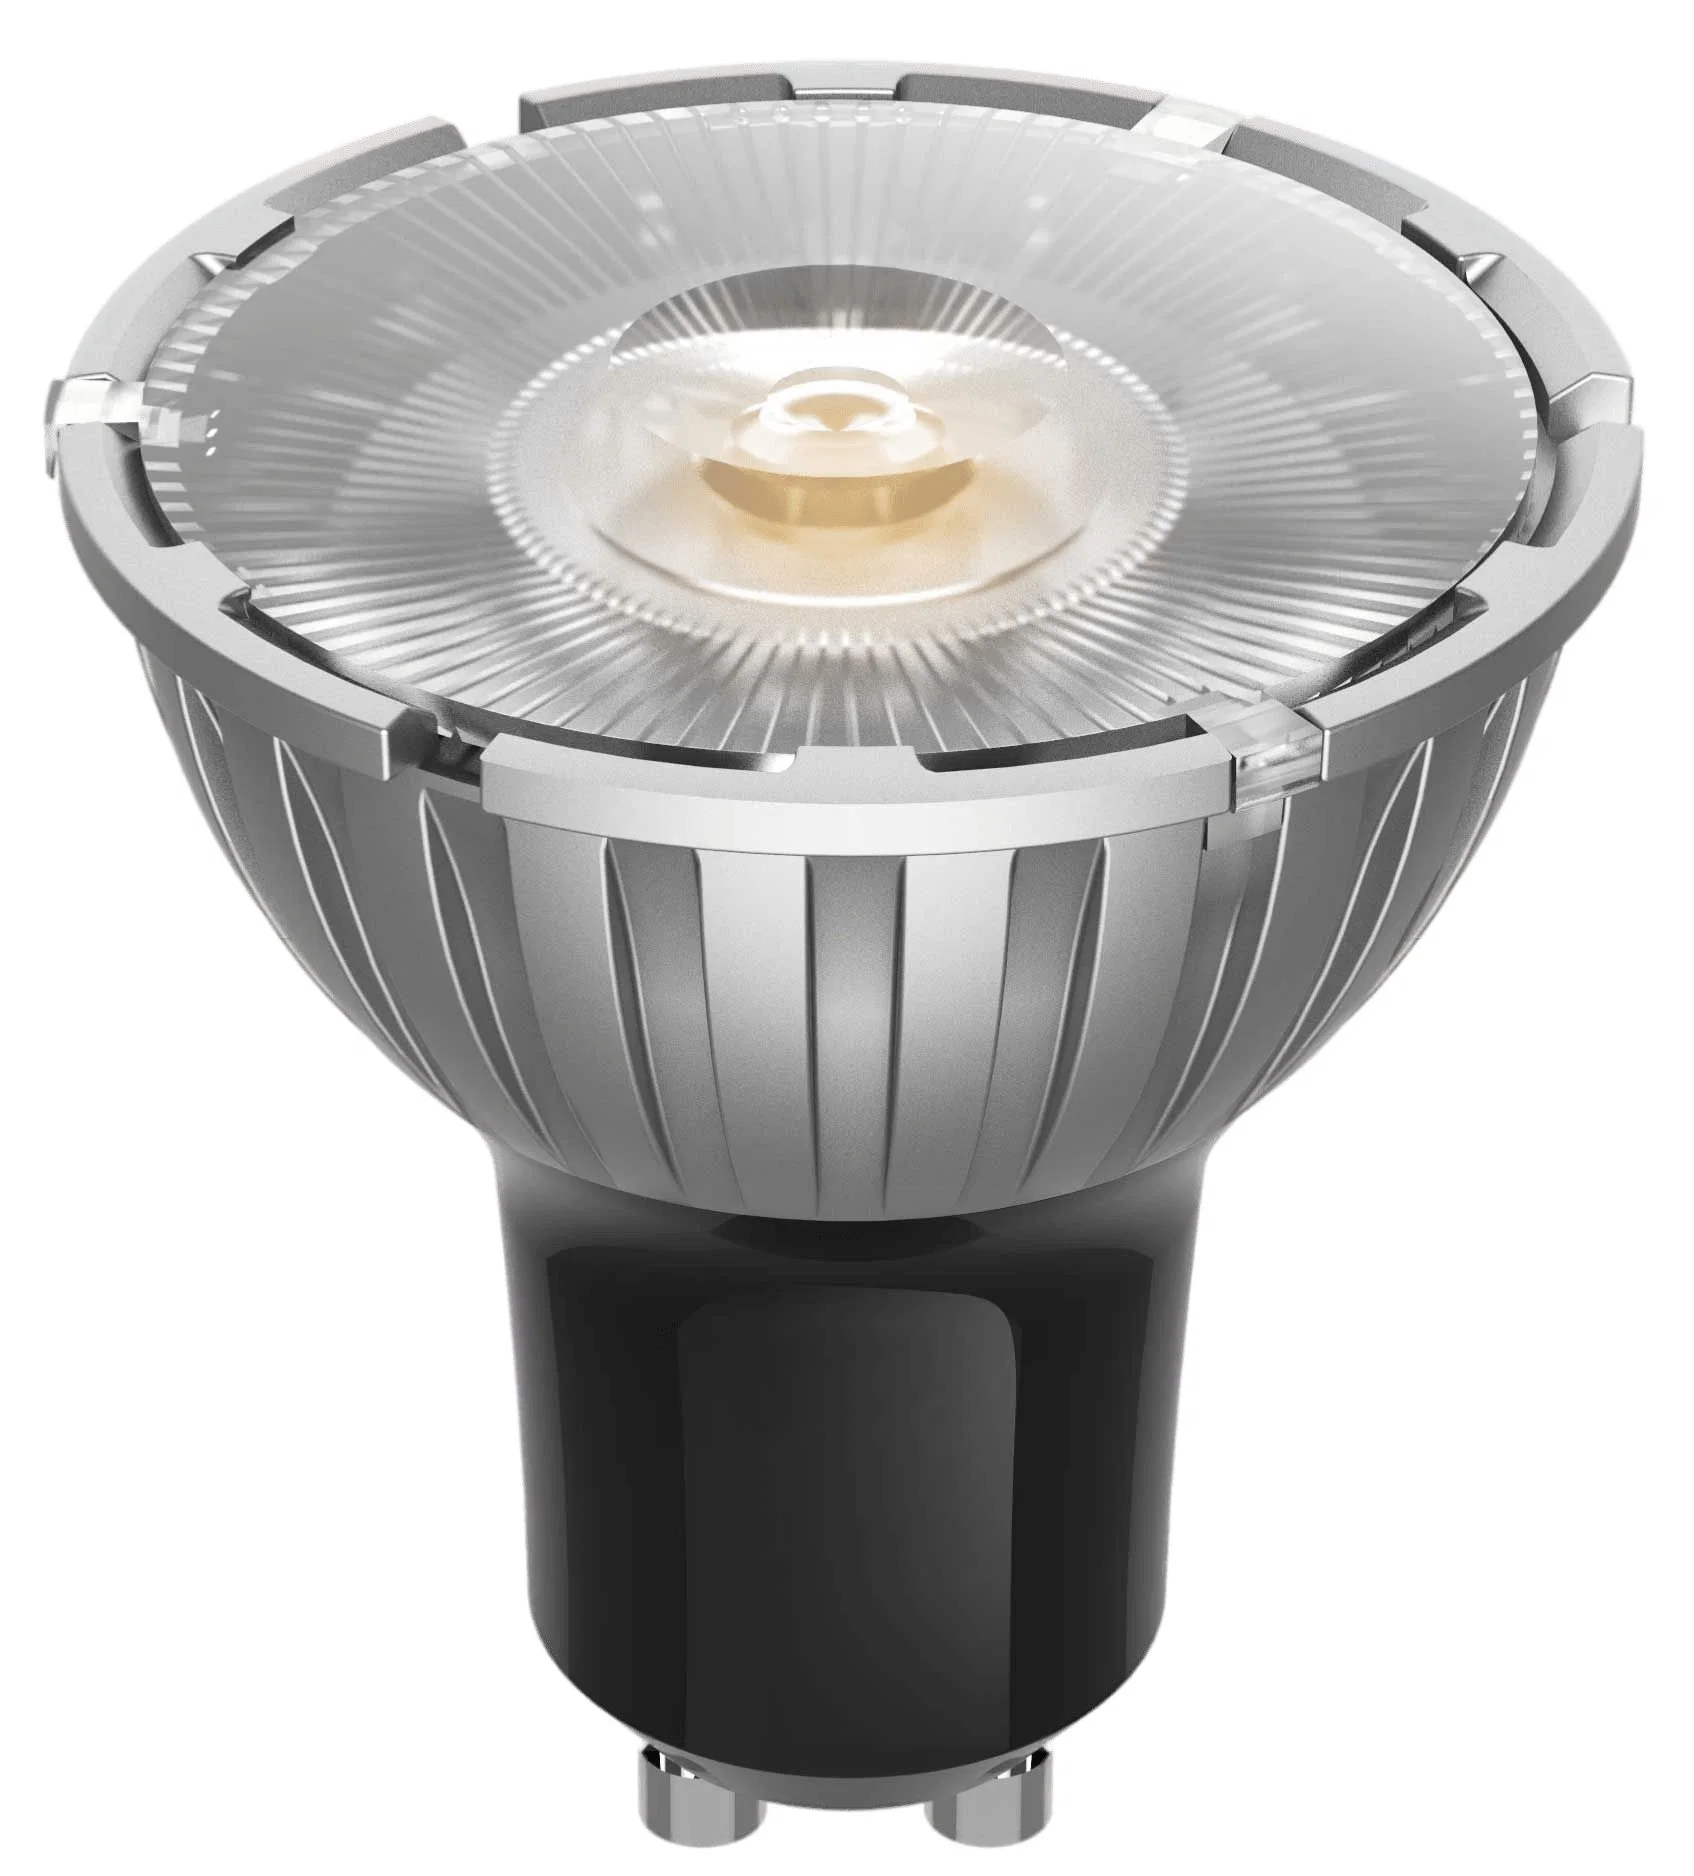 Chinese Factory GU10 3000K Warm White LED Dimmable Bulb Spot Light Lamp with Adjustable 3 Beam Angles